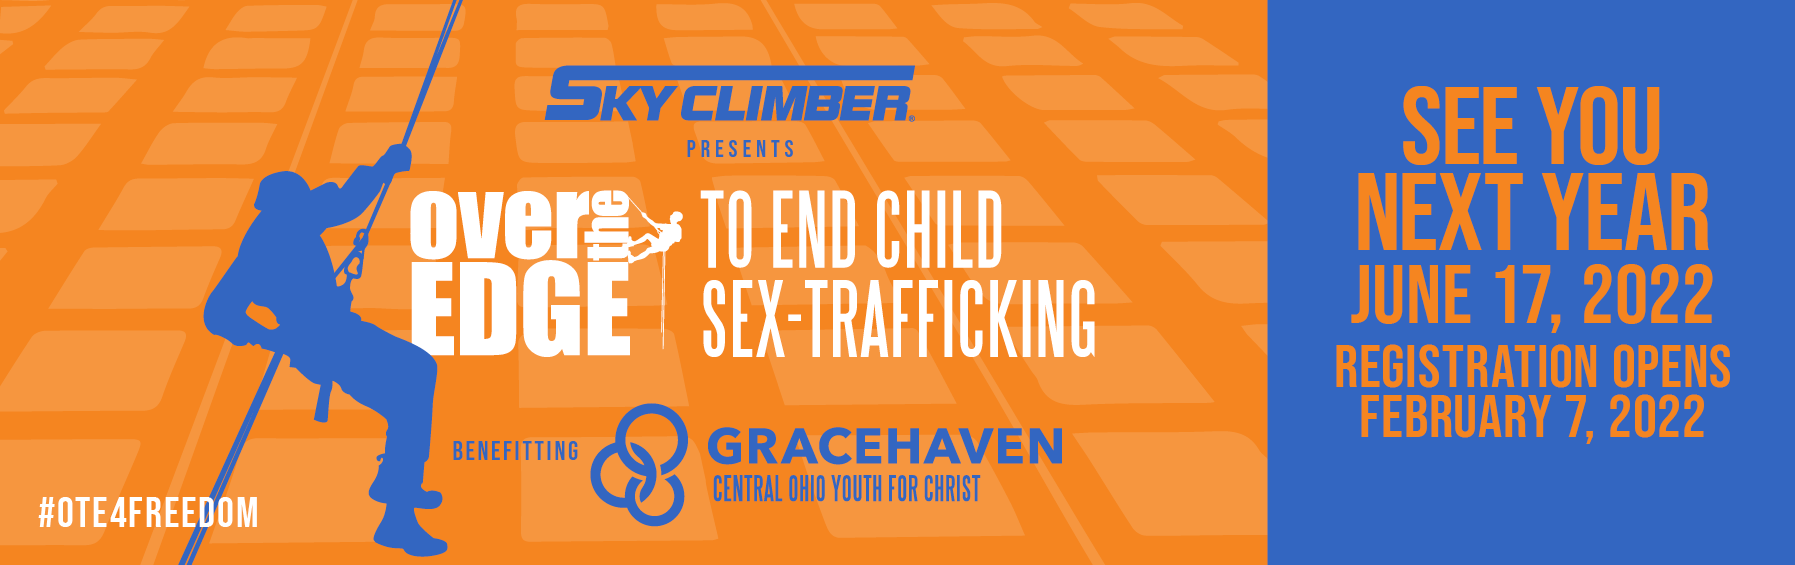 Grace Haven Over the Edge To End Child Sex-Trafficking